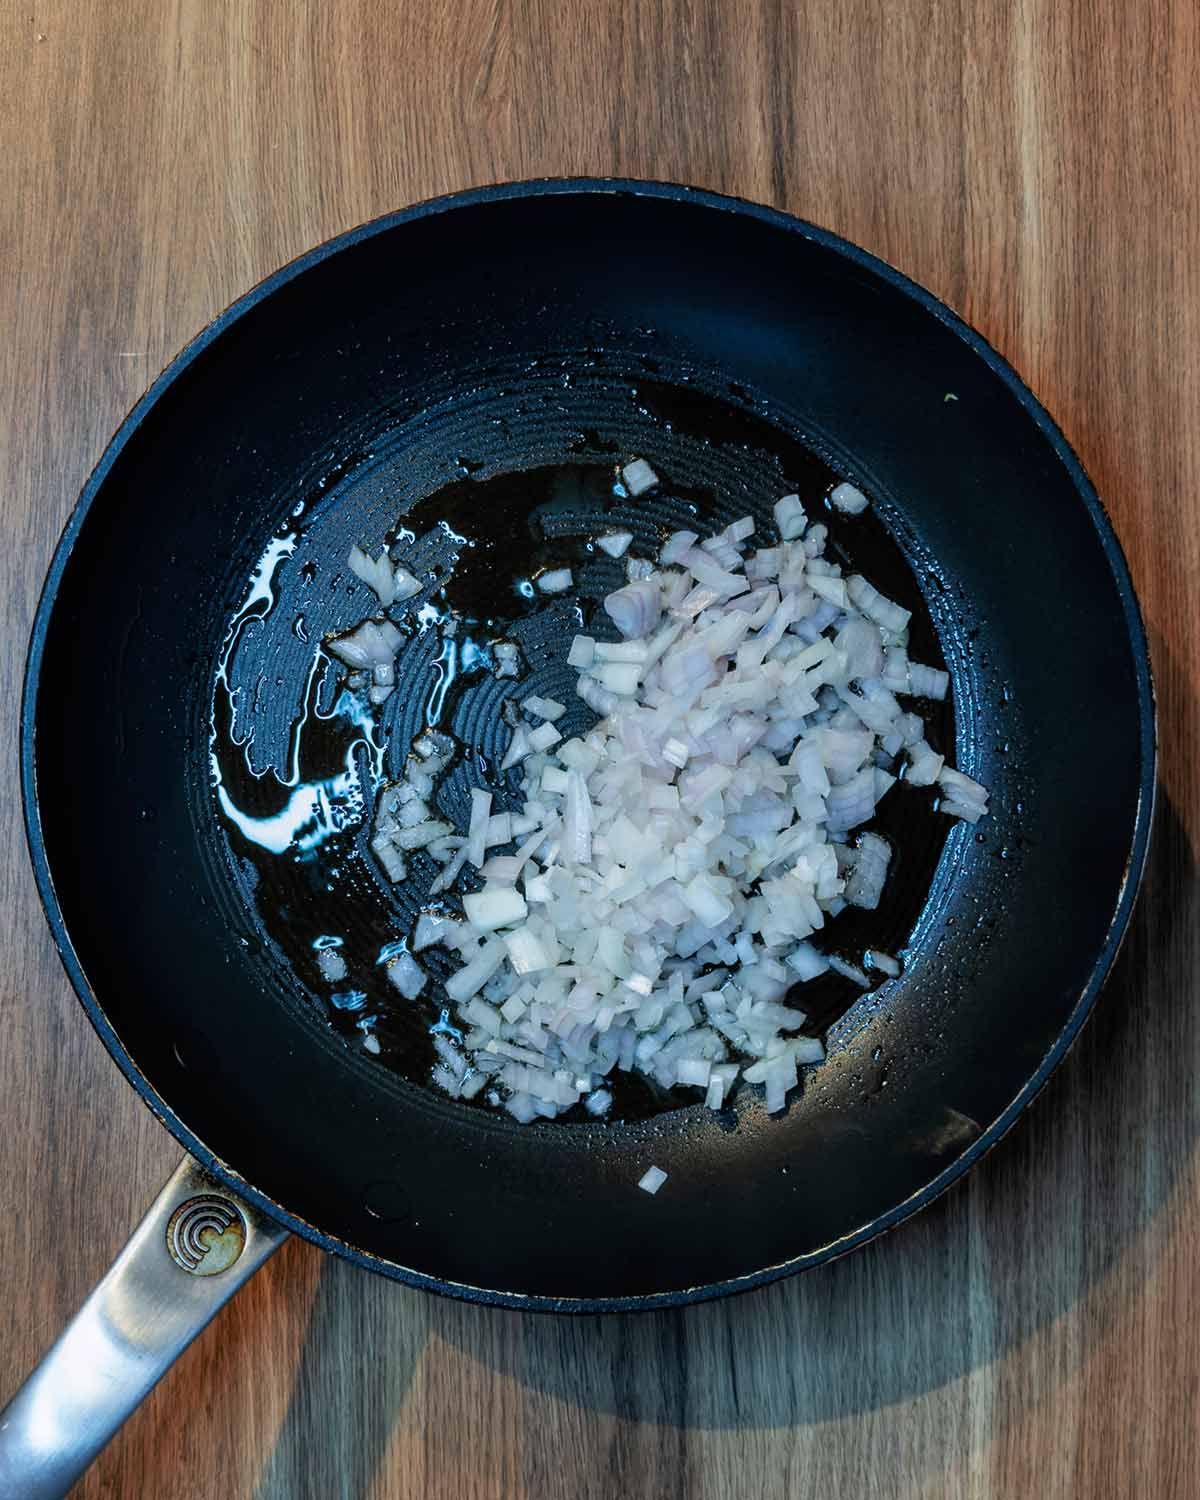 Chopped shallots cooking in a frying pan.